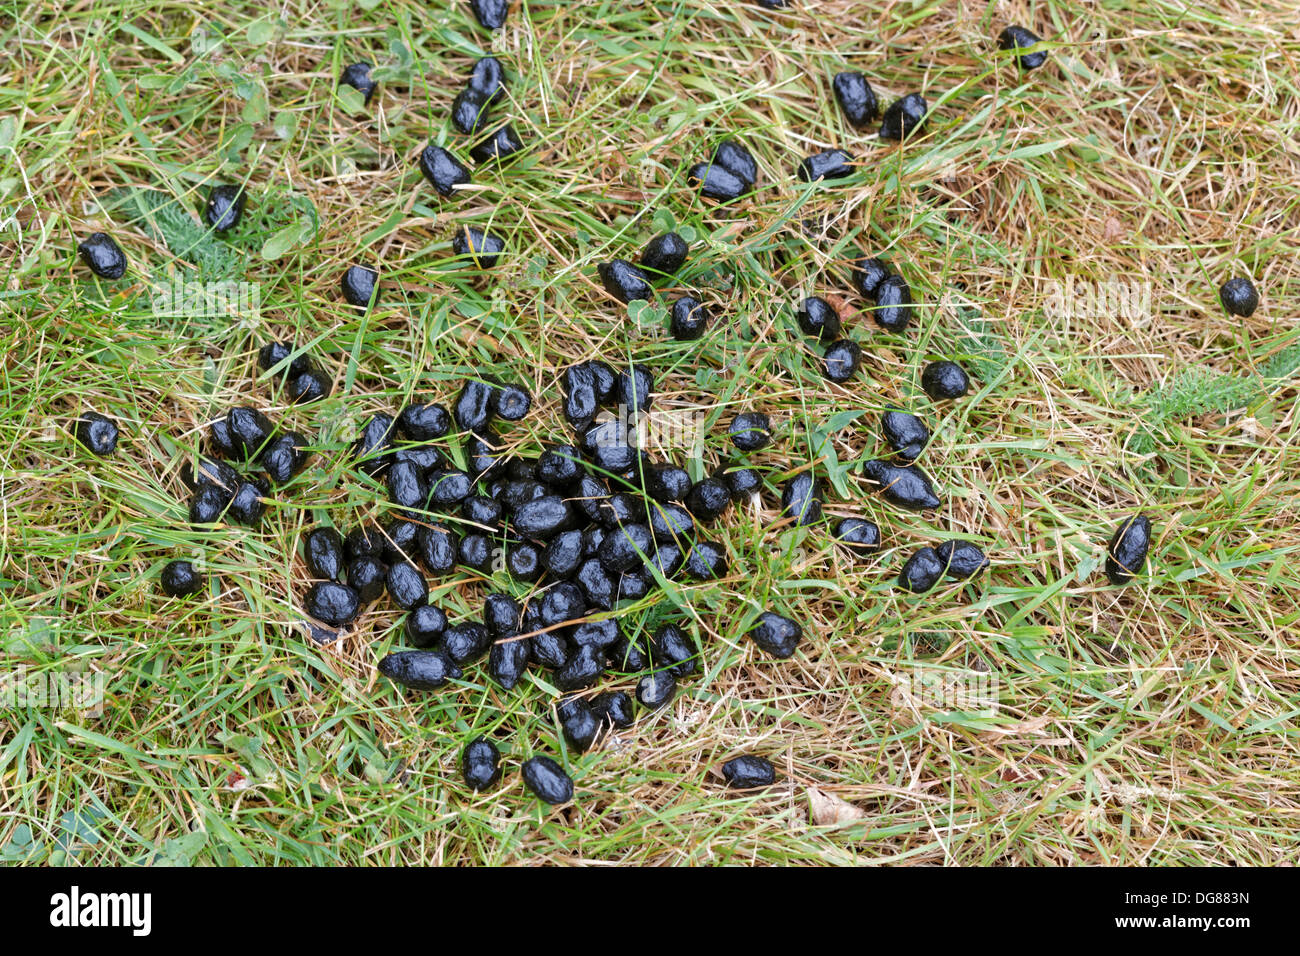 Deer droppings on a garden lawn Stock Photo